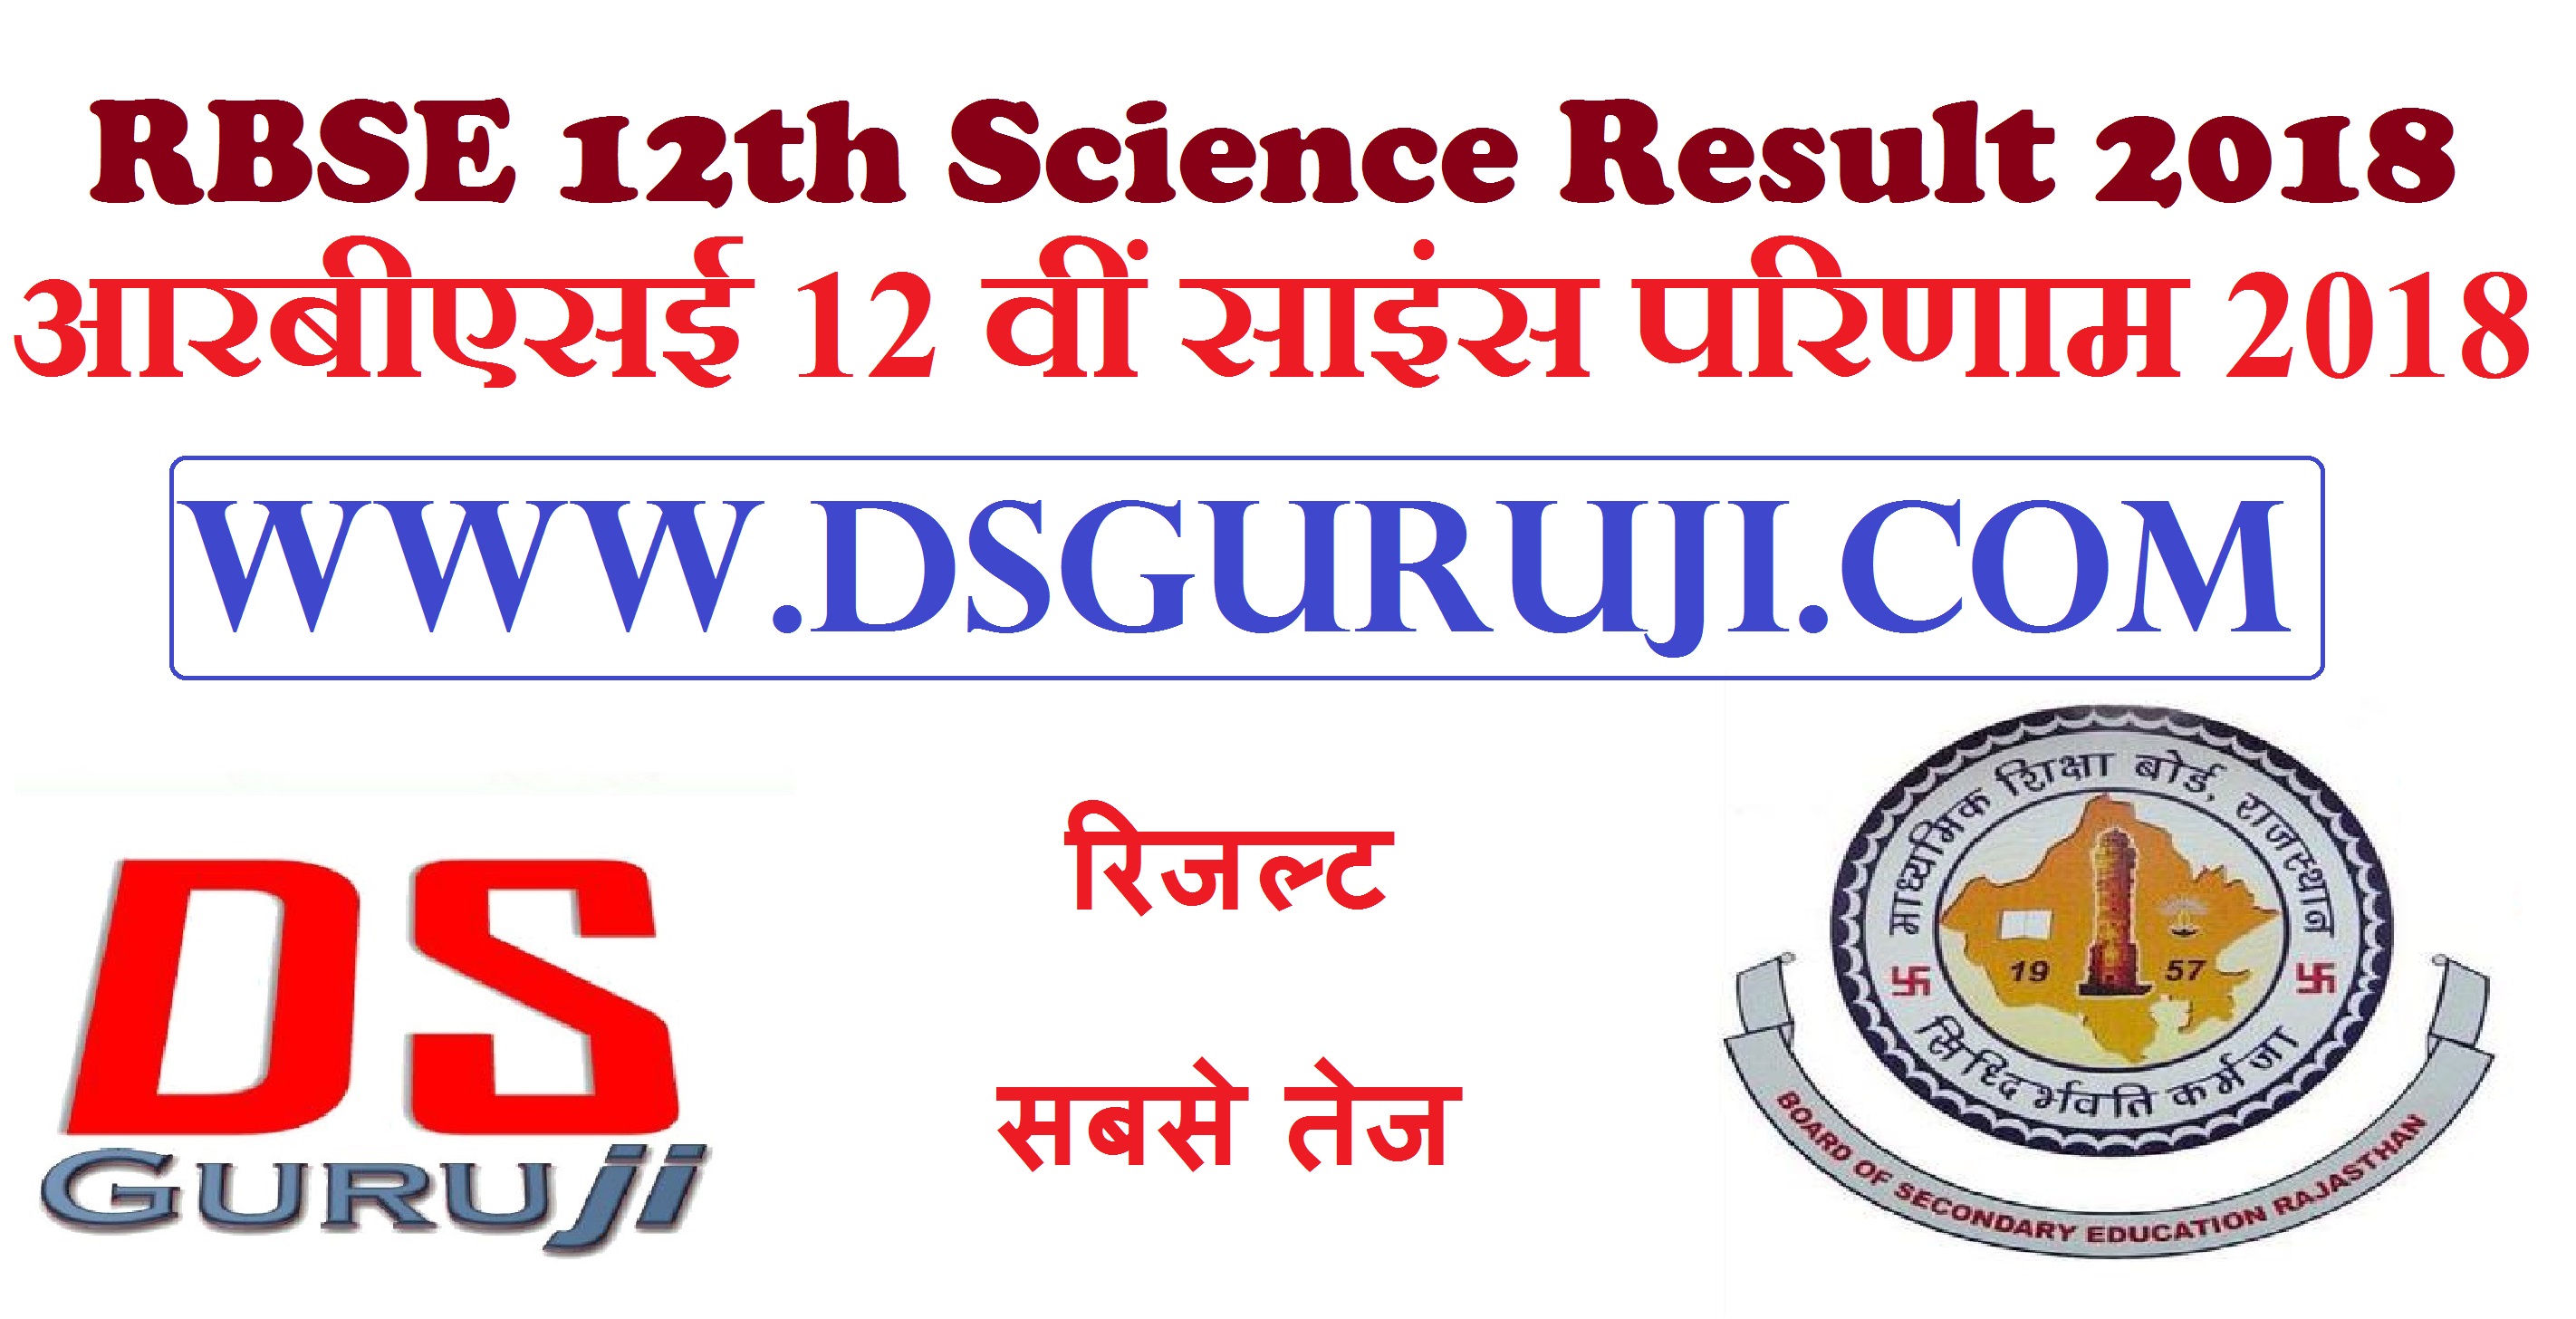 ajmer news,RBSE 12th Science Results,RBSE Board Exam 2018,